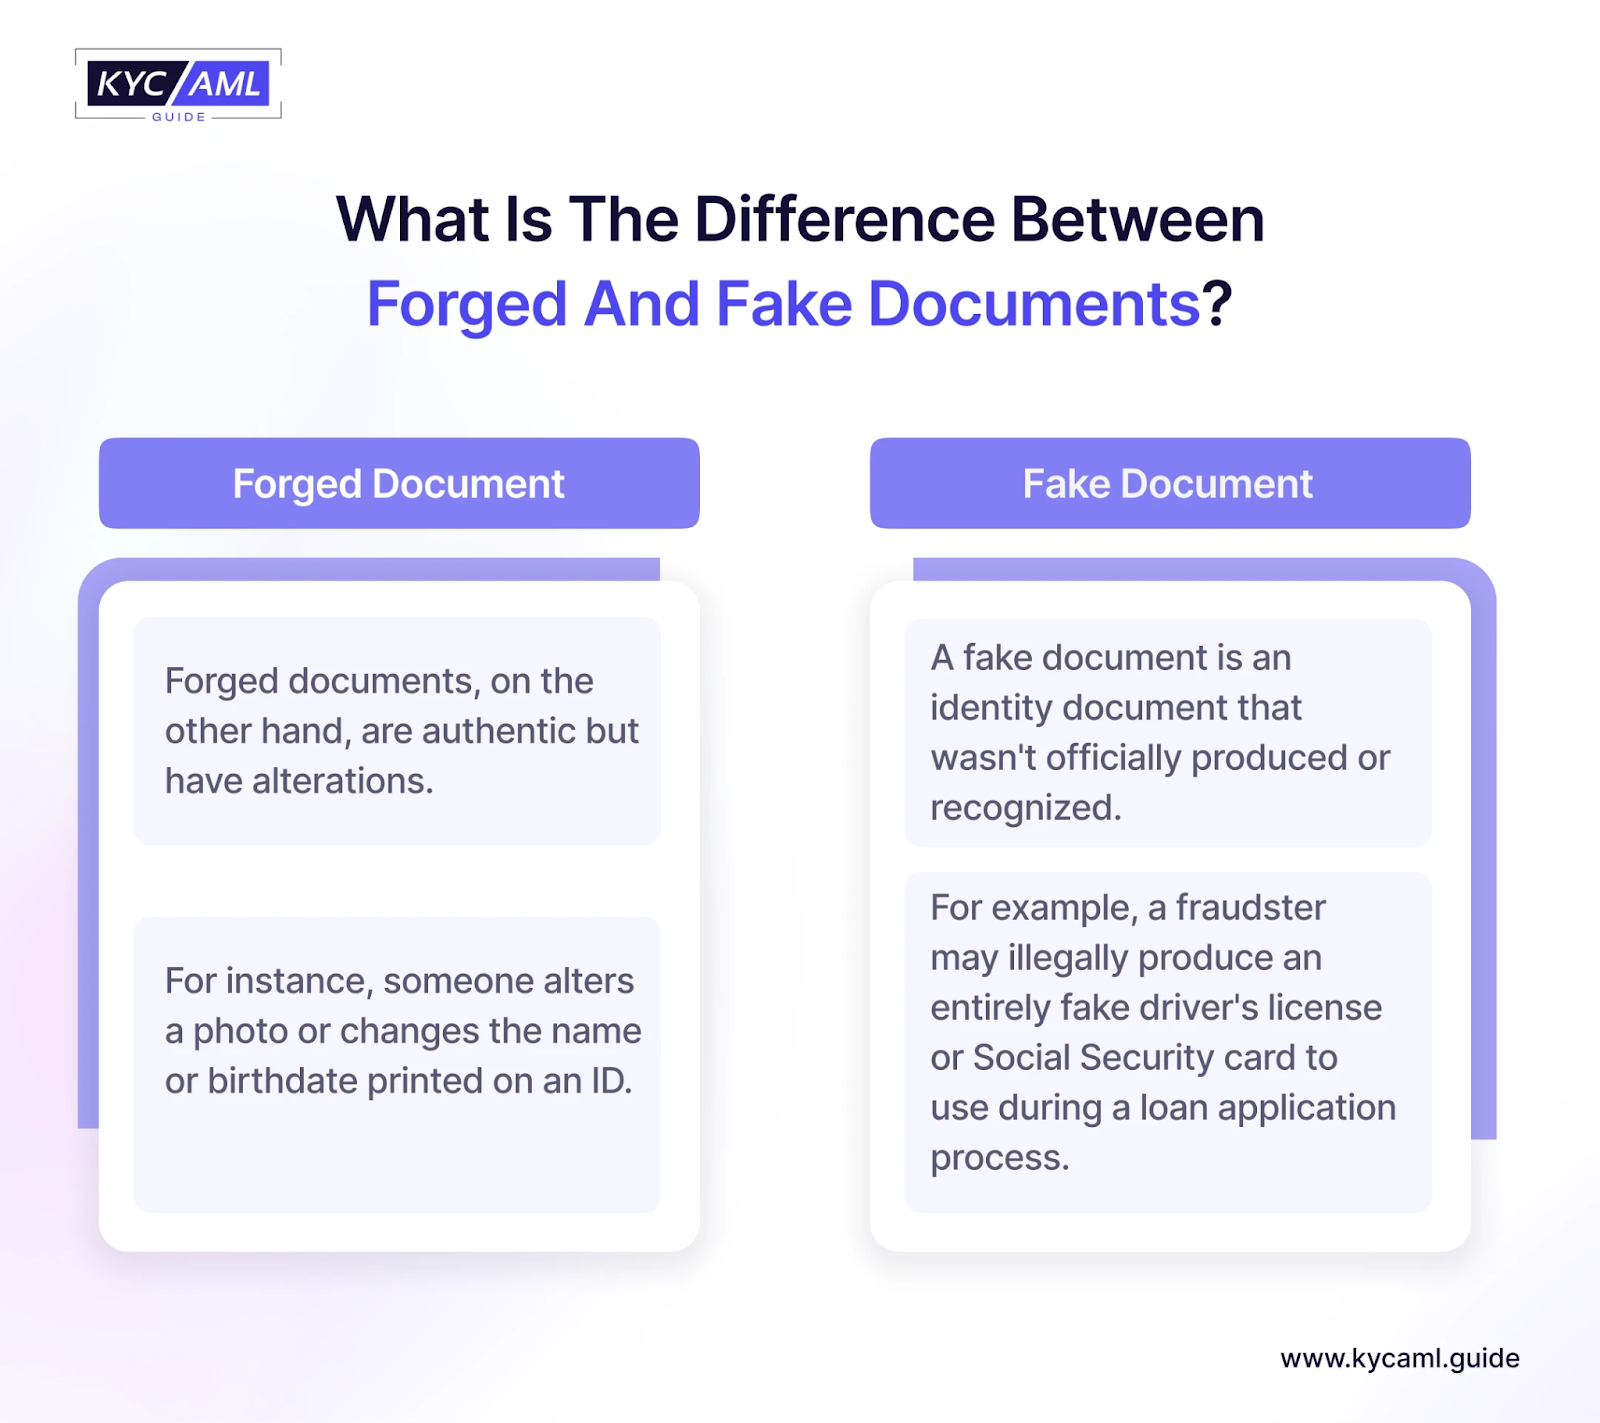 What Is The Difference Between Forged And Fake Documents?